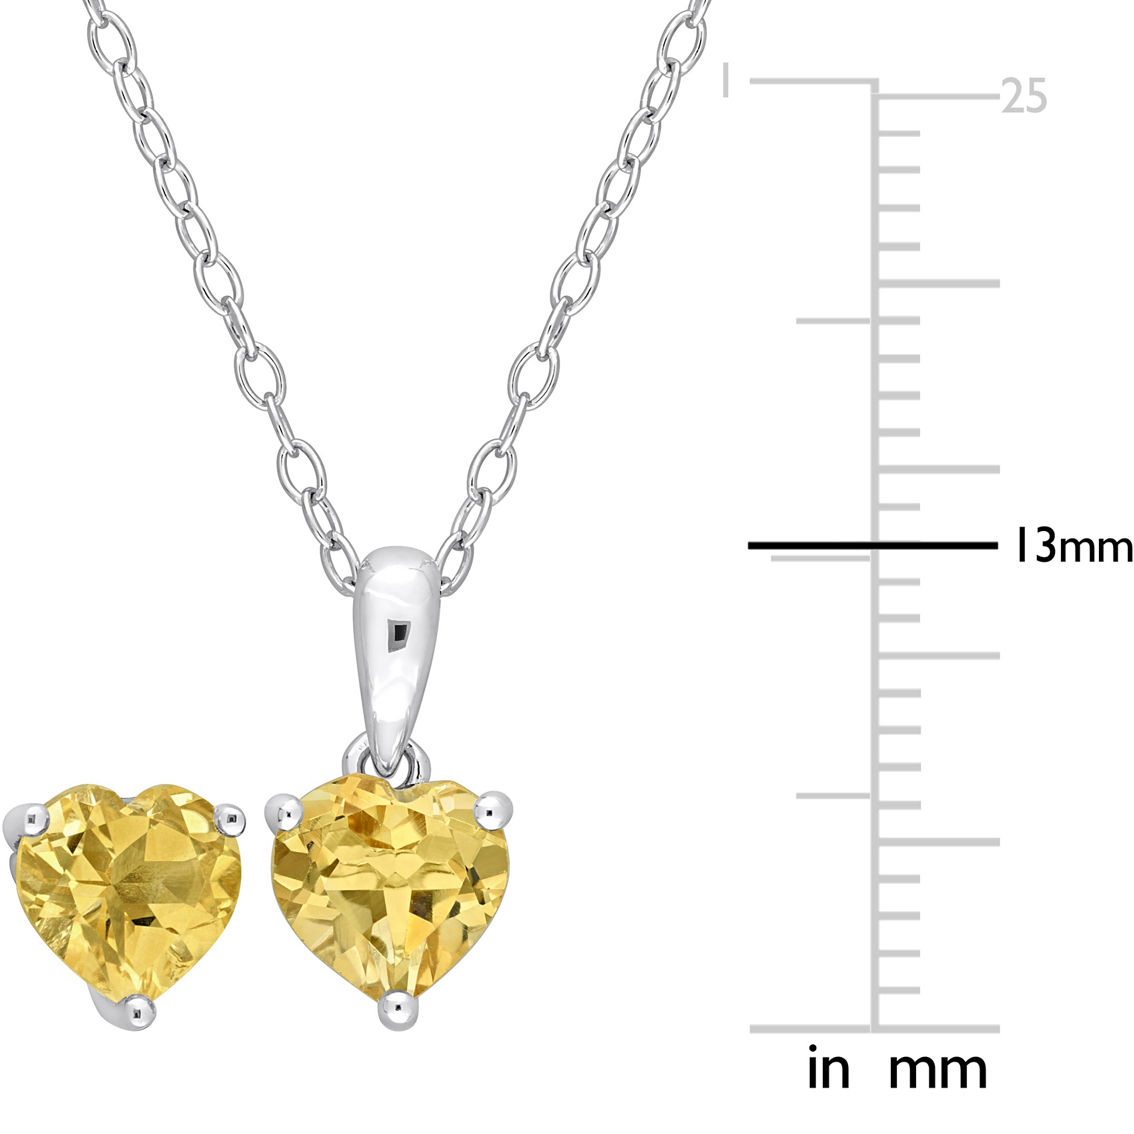 Sofia B. Heart-Shape Citrine Solitaire Sterling Silver Necklace and Earrings Set - Image 4 of 4